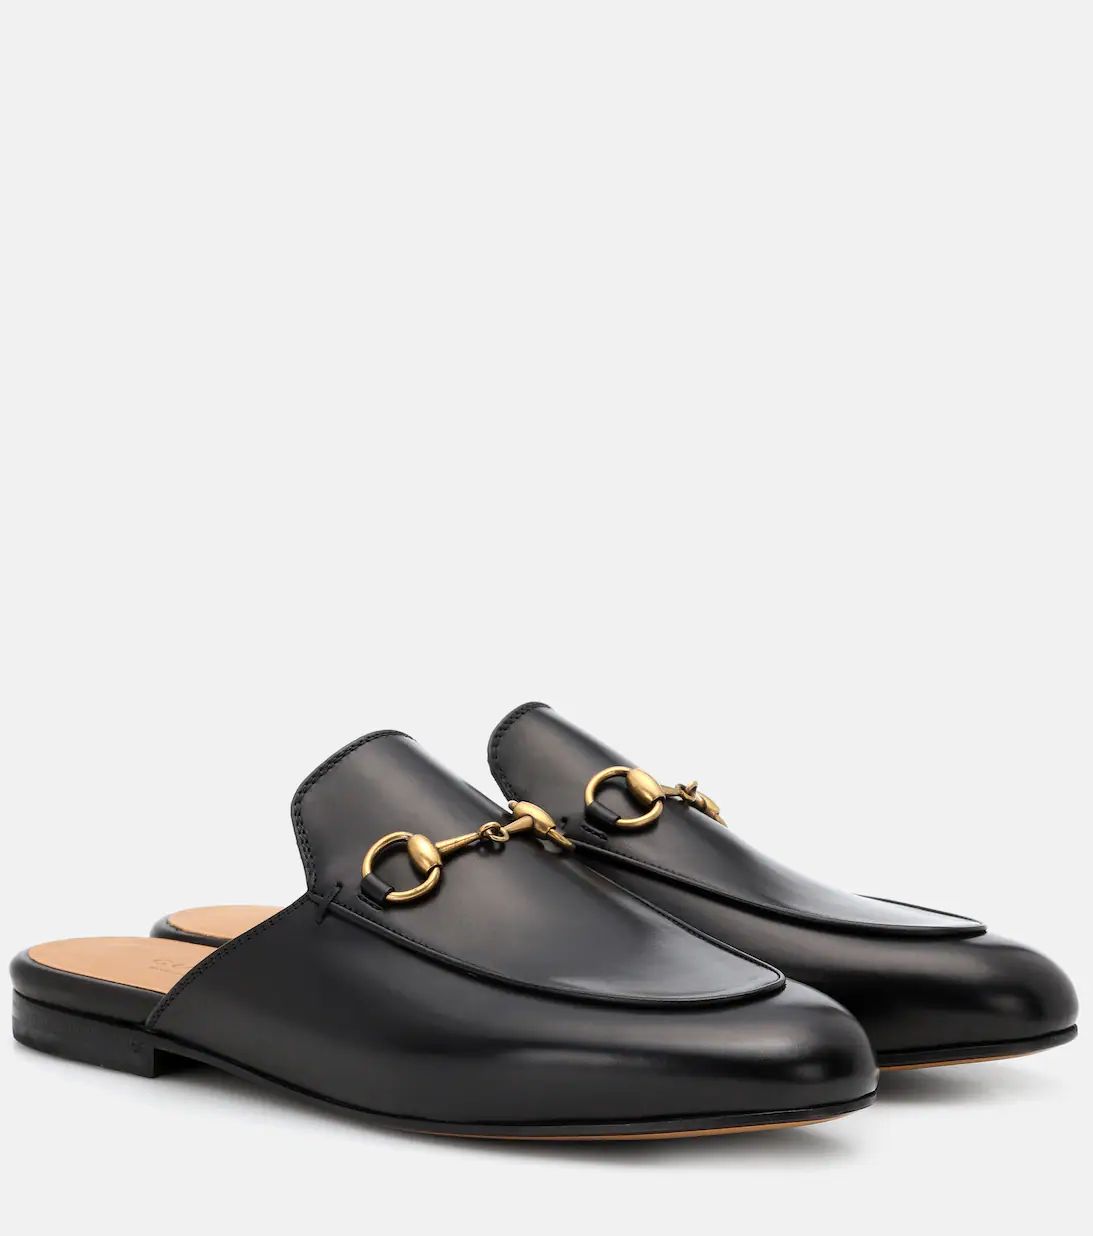 GucciPrincetown leather slippers | Mytheresa (UK)